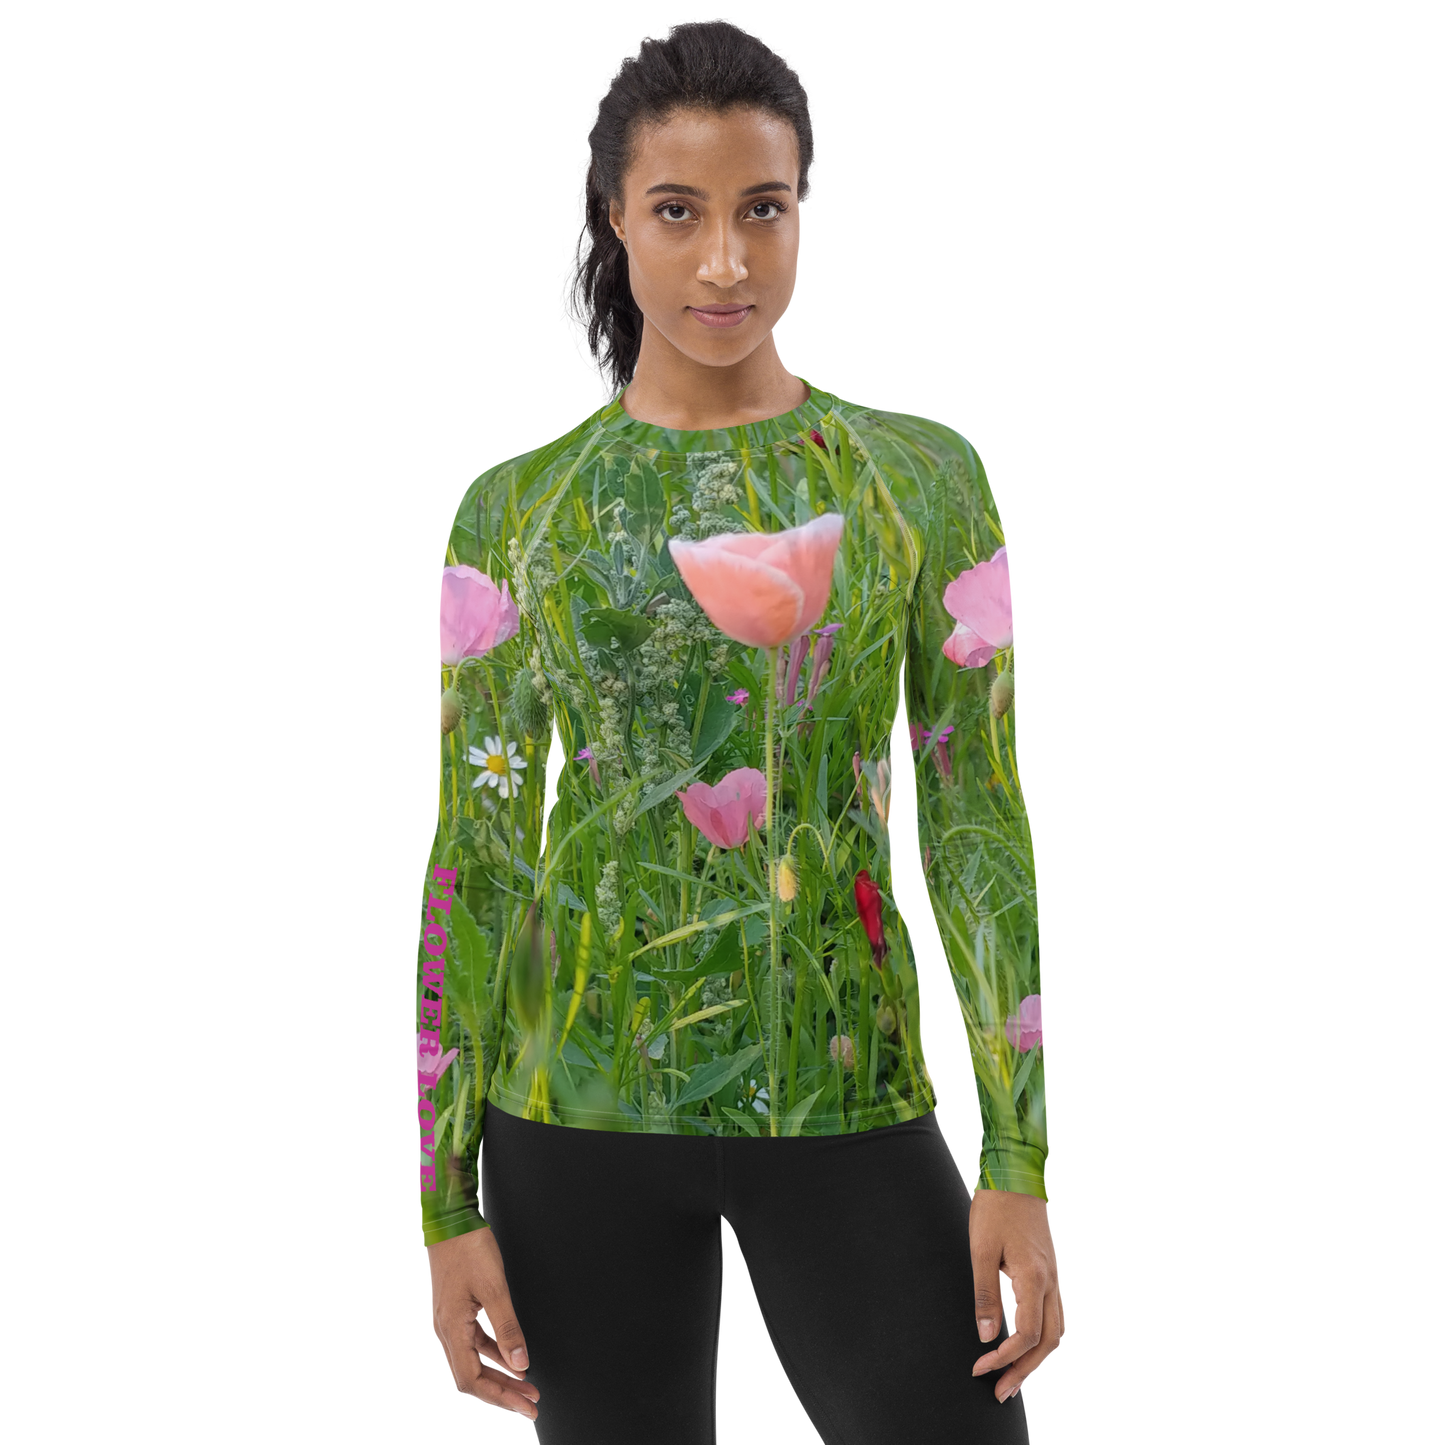 The FLOWER LOVE Collection - "Wildflower Wonder" Design Luxurious Women's Rash Guard, Sun Protective Clothing, Sports & Fitness Clothing